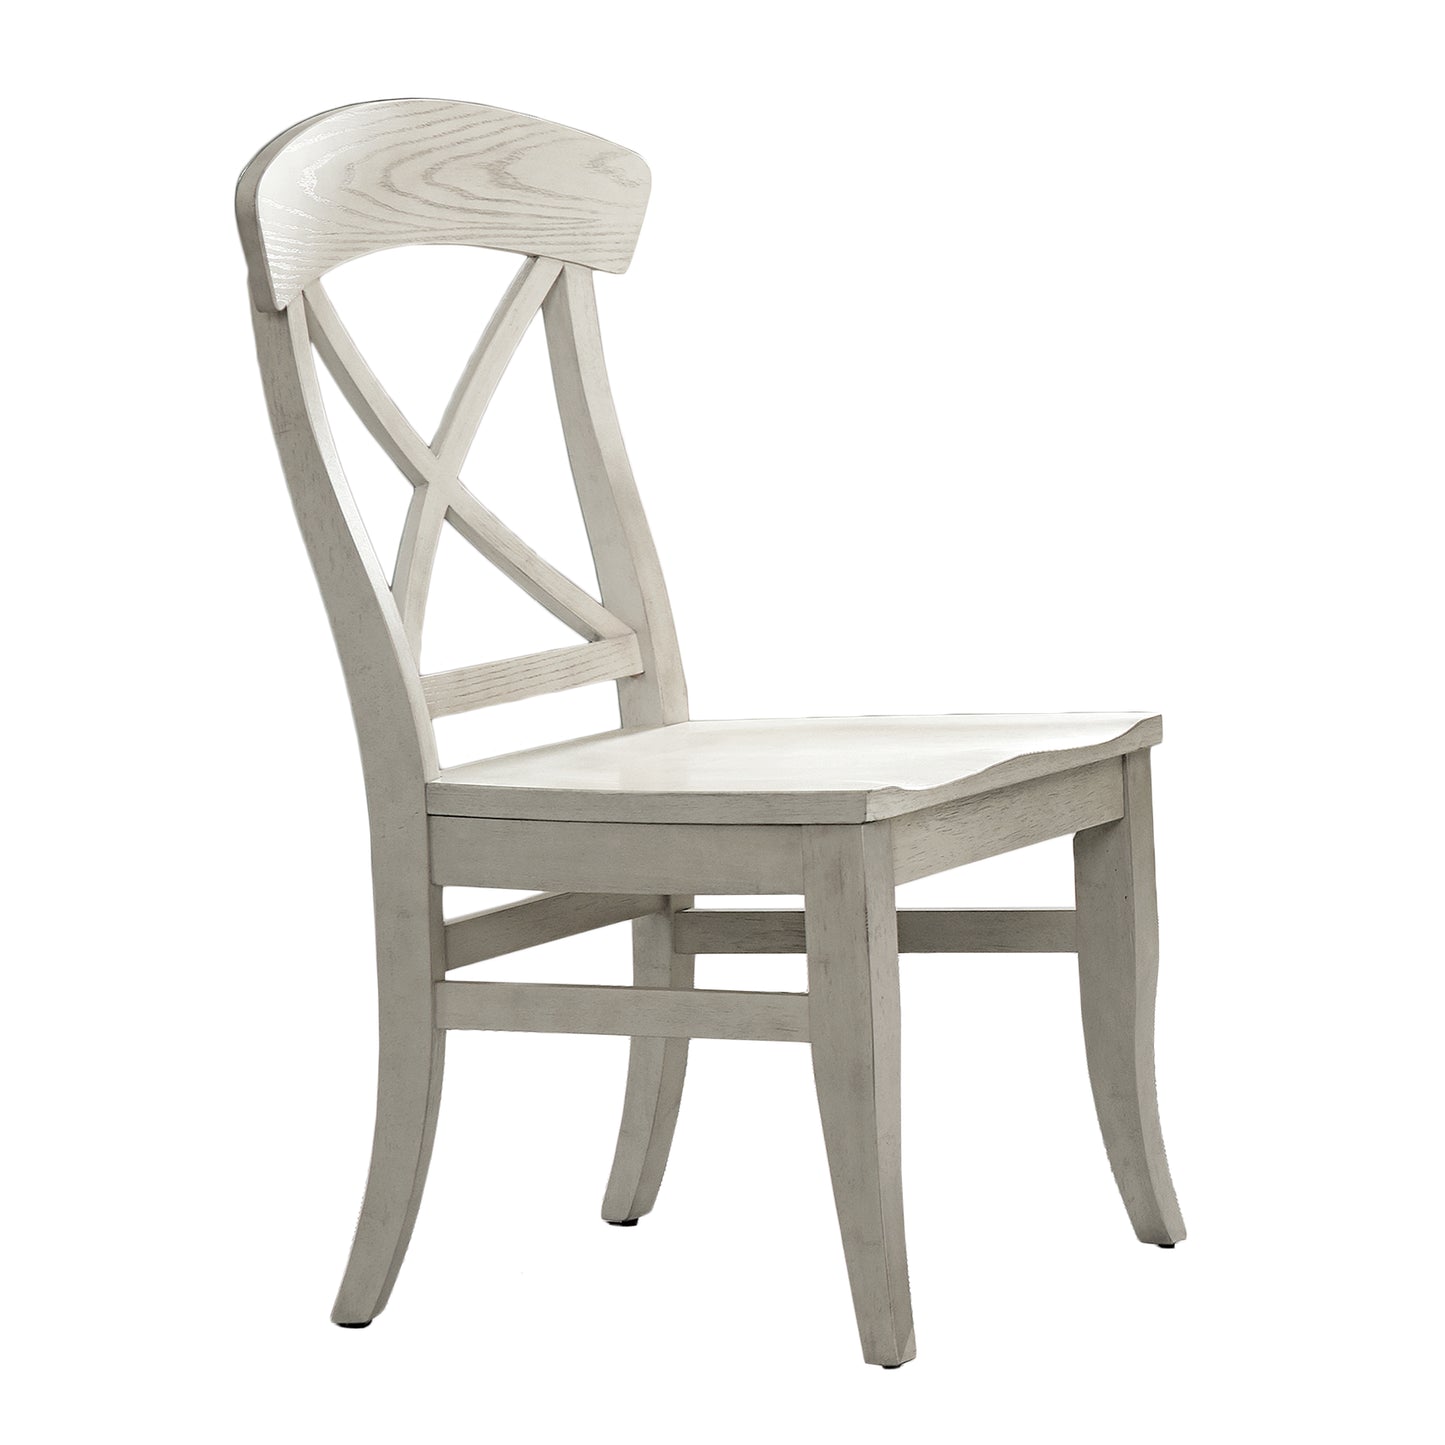 Roundhill Furniture Harola Cross-back Dining Side Chairs in Set of 2, Smoky White Finish